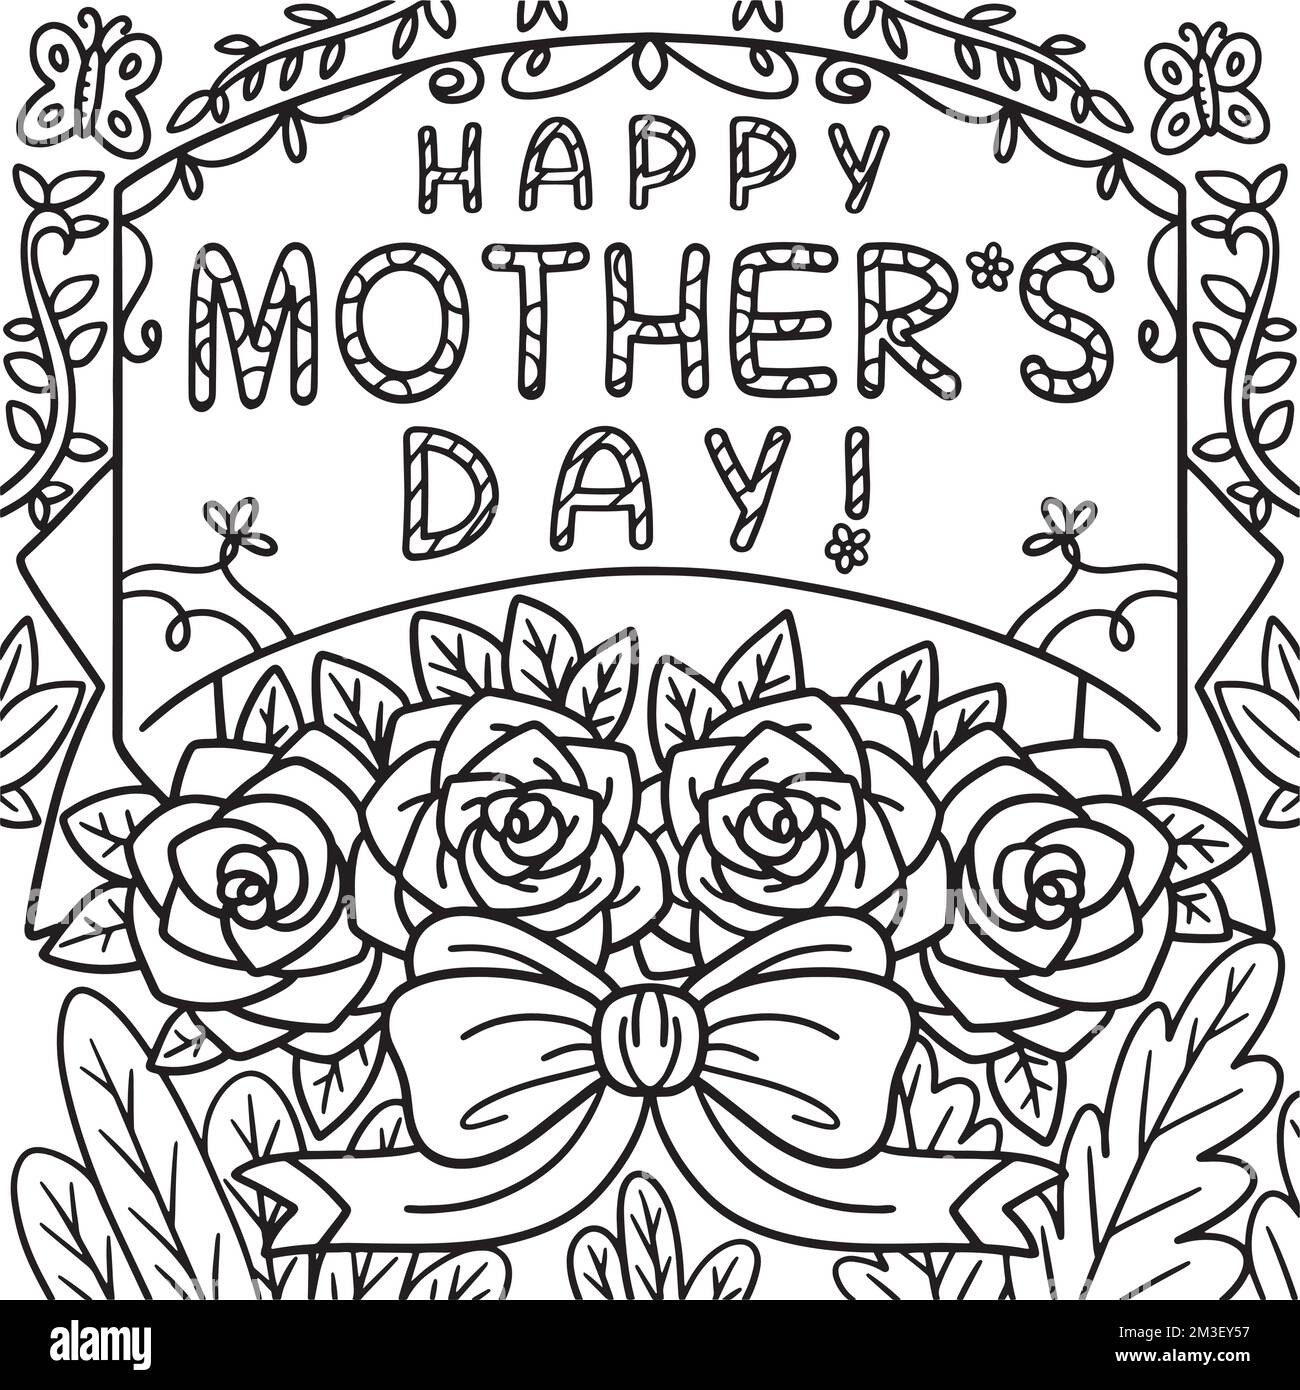 Kids drawing happy mothers day Royalty Free Vector Image-saigonsouth.com.vn